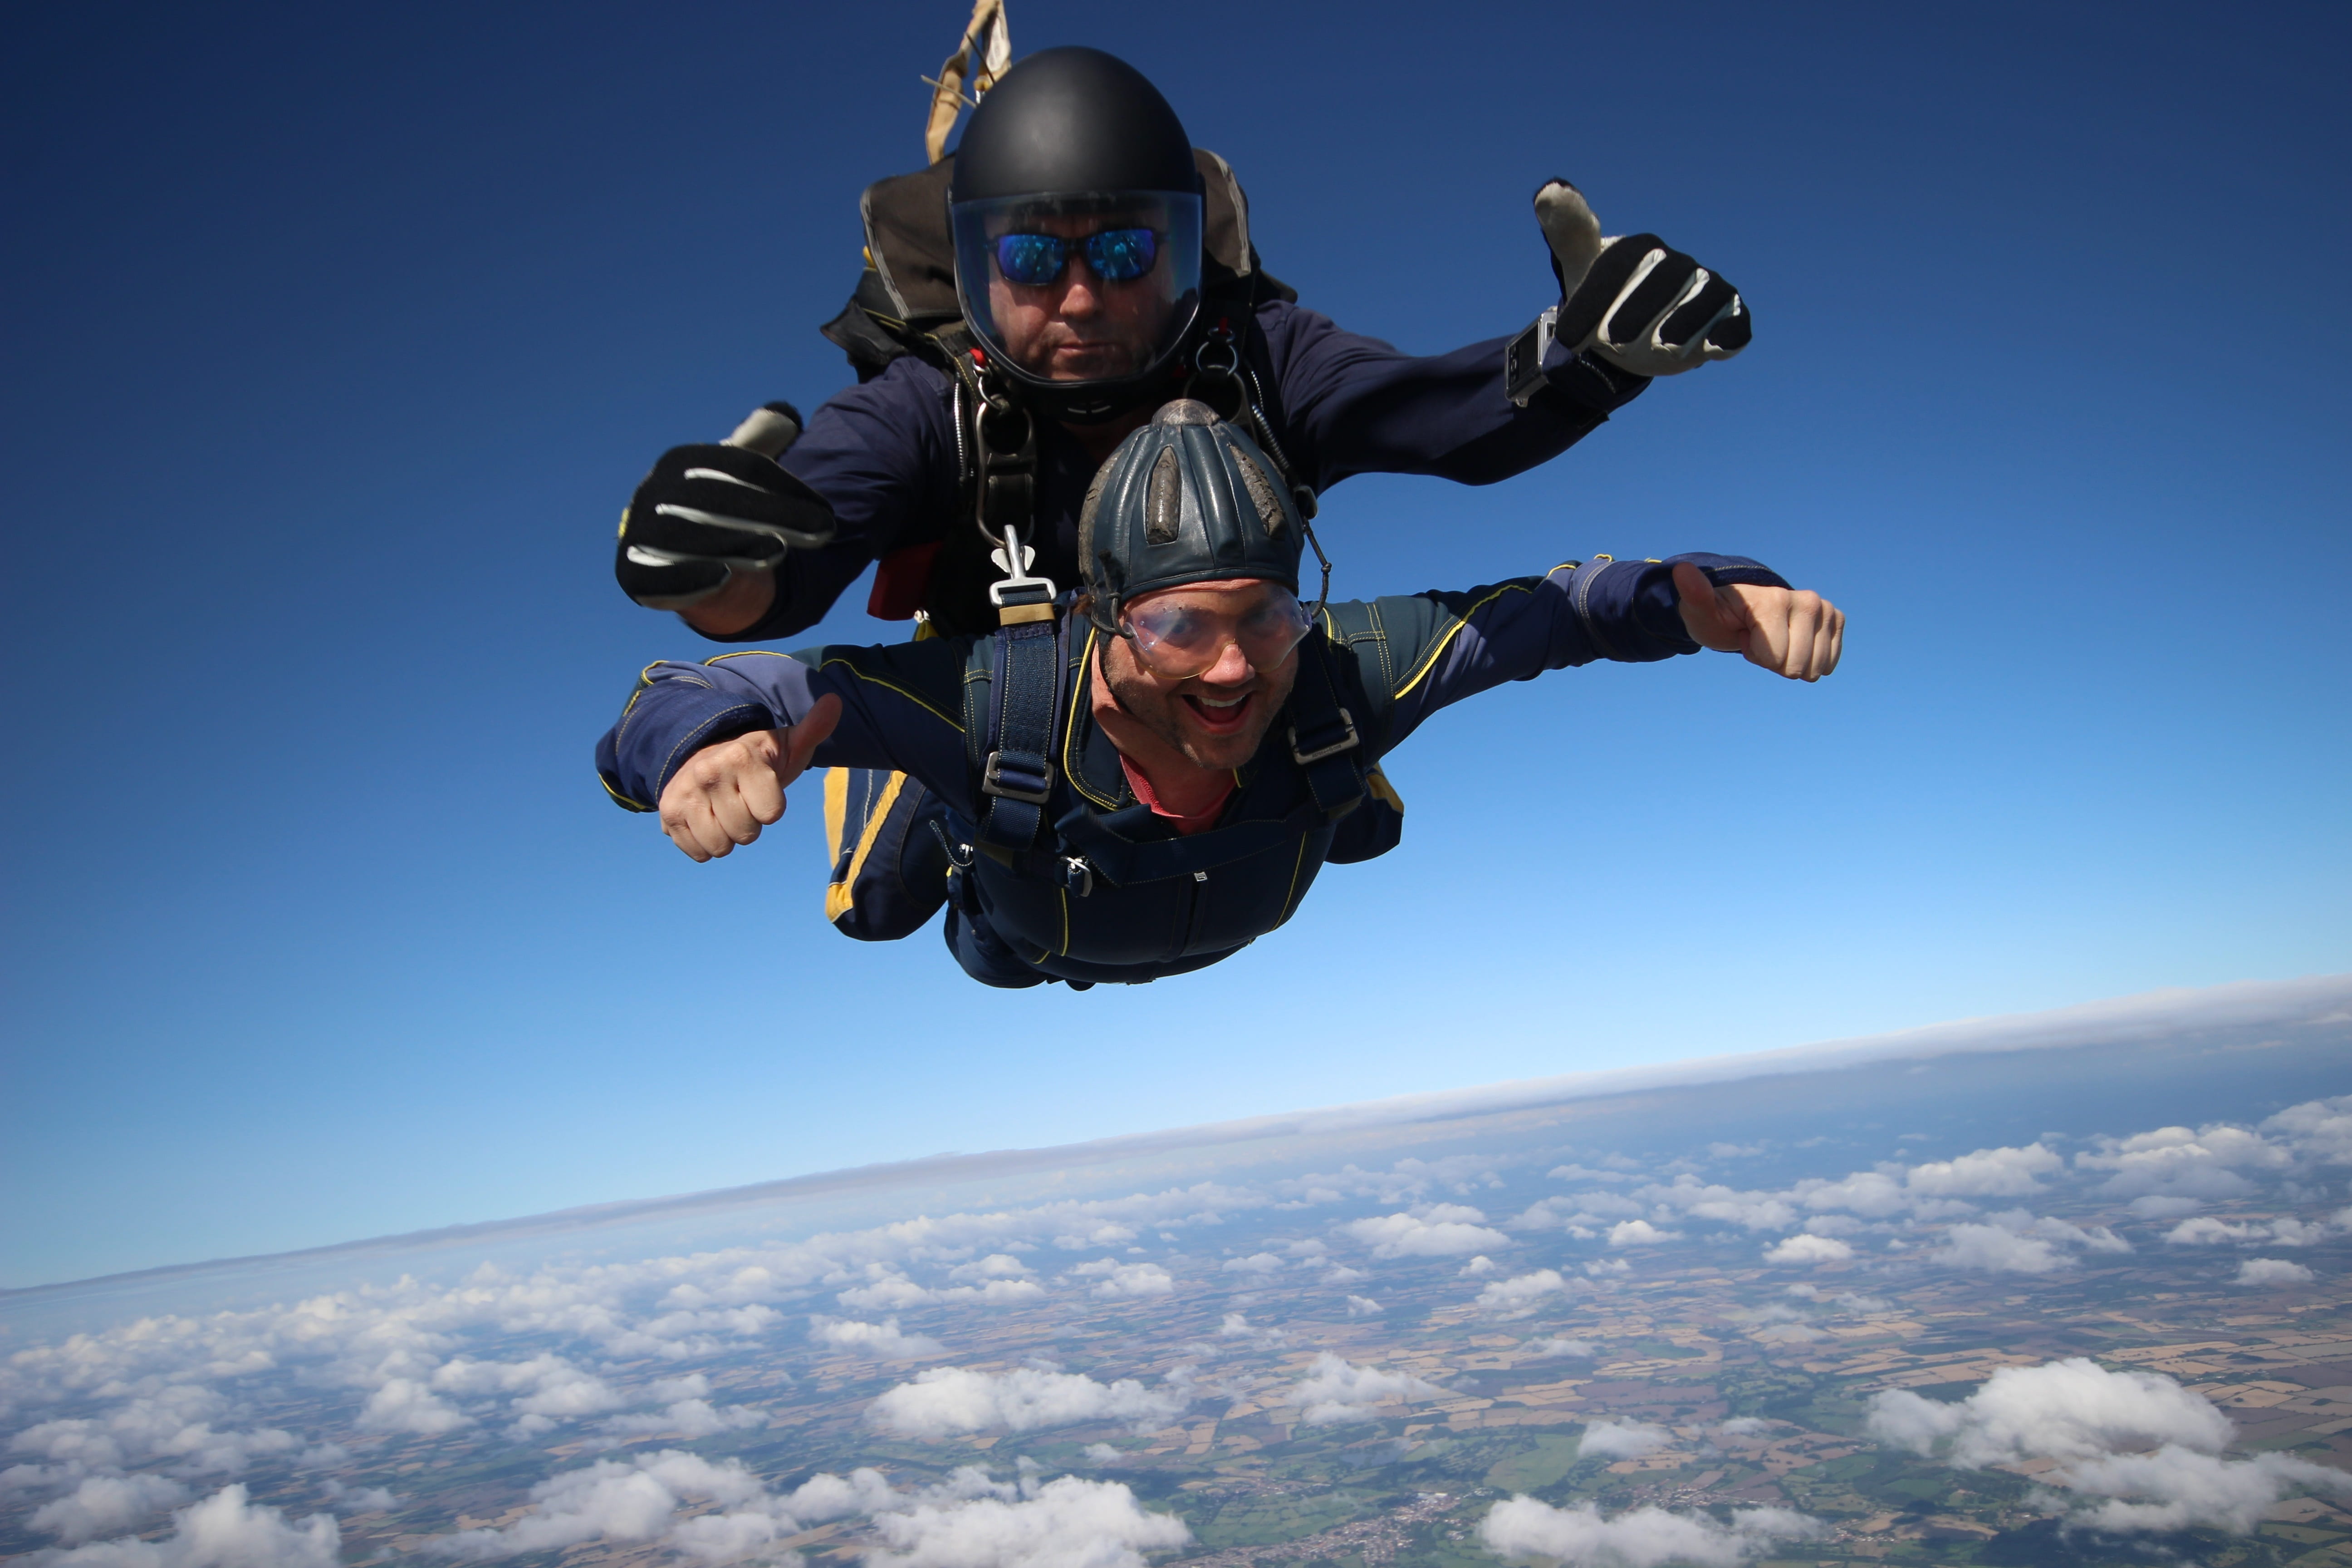 tandem, skydive, fun, mid-air, skydiving, one person, blue